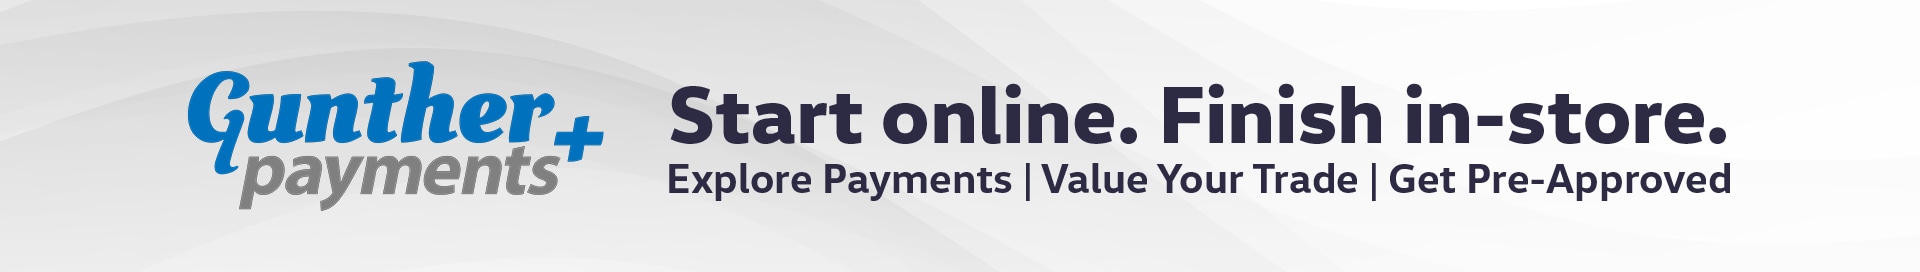 Gunther Plus Payments. Start Online. Finish in-store. Explore payments, value your trade, get pre-approved.